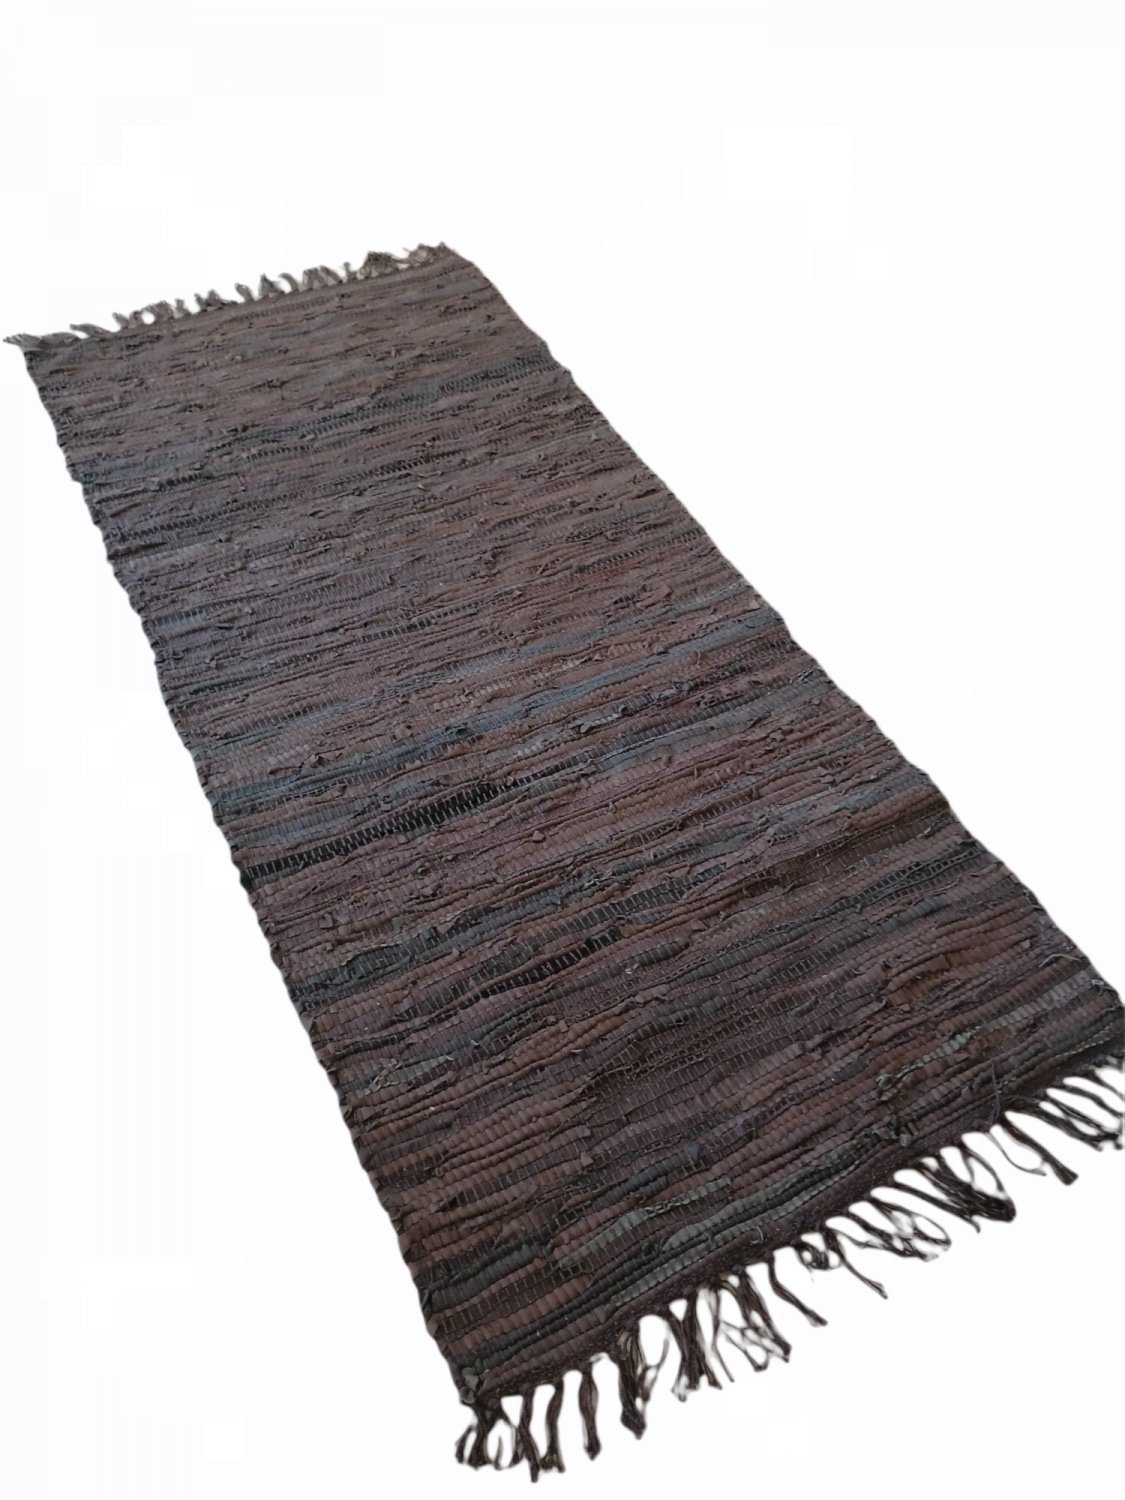 Leather Rug for Fireplace Fireproof Carpet BROWN Hearth Fire Resistant Mat Rug